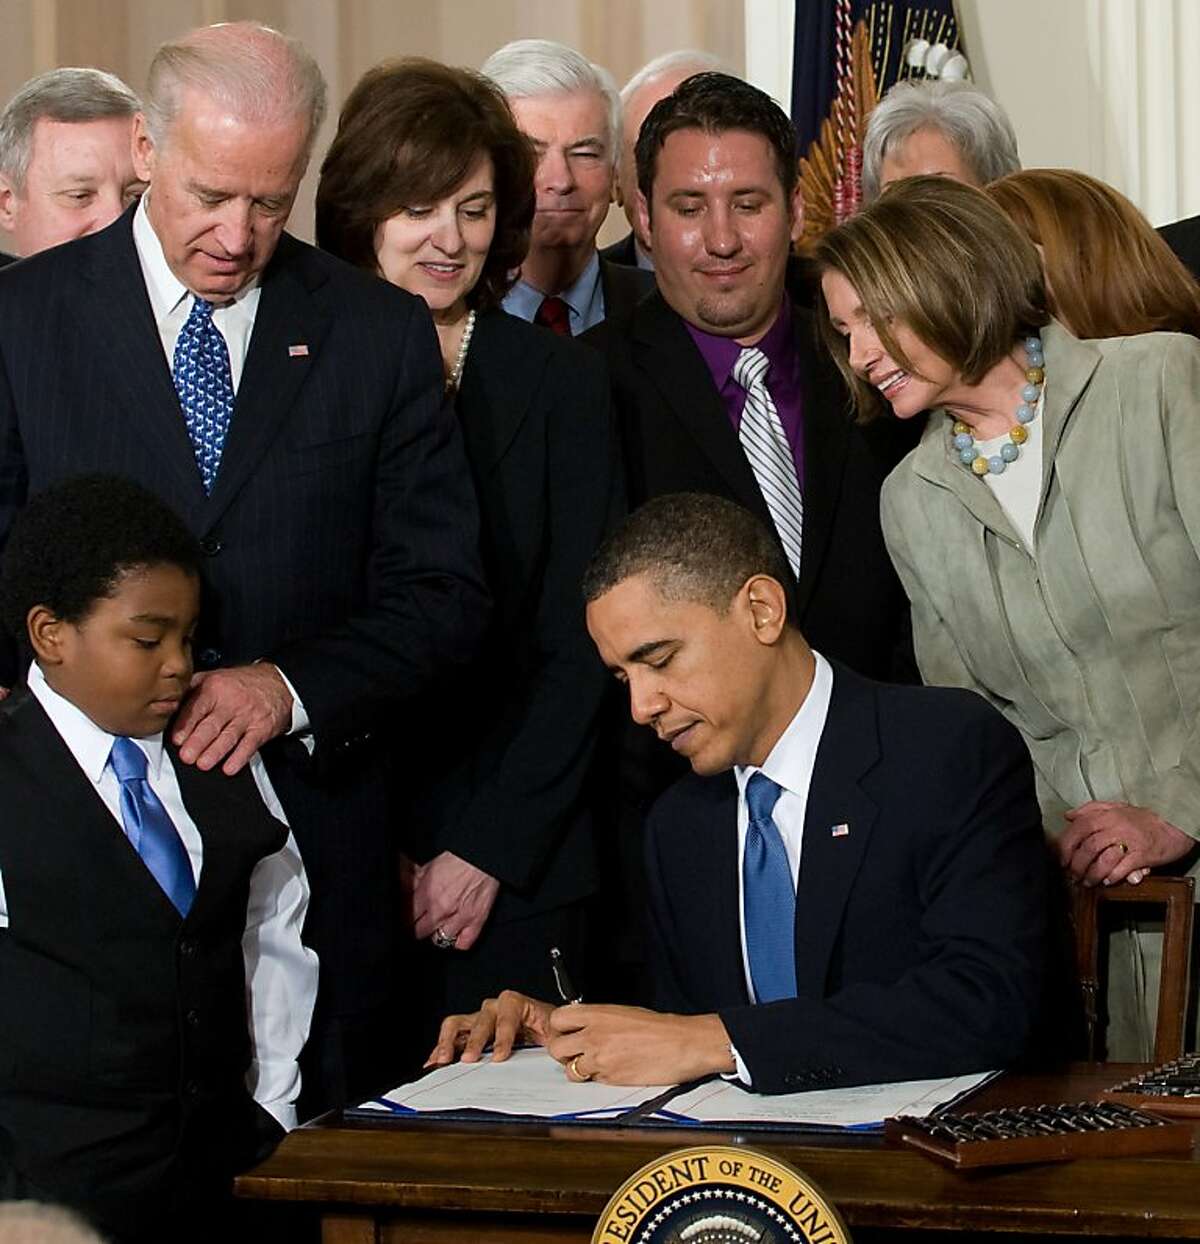 US President Barack Obama, surrounded by lawmakers and guests, signs the healthcare insurance reform legislation during a ceremony in the East Room of the White House in Washington on March 23, 2010. Obama signed into law his historic health care reform, enacting the most sweeping social legislation in decades which will ensure coverage for almost all Americans. AFP PHOTO / Saul LOEB (Photo credit should read SAUL LOEB/AFP/Getty Images) Ran on: 03-24-2010 President Obama signs the health care overhaul bill surrounded by officials, guests and Marcelas Owens, 11, of Seattle, who began campaigning for the bill after his uninsured mother died of pulmonary hypertension. Ran on: 03-24-2010 President Obama signs the health care overhaul bill surrounded by officials, guests and Marcelas Owens, 11, of Seattle, who began campaigning for the bill after his uninsured mother died of pulmonary hypertension. Ran on: 04-04-2010 President Obama signs the health care insurance reform bill in the East Room of the White House. At left is Marcelas Owens, 11, of Seattle, who began campaigning for the bill after his uninsured mother died of hypertension. Ran on: 04-04-2010 President Obama signs the health care insurance reform bill in the East Room of the White House. At left is Marcelas Owens, 11, of Seattle, who began campaigning for the bill after his uninsured mother died of hypertension. Ran on: 12-26-2010 President Obama and House Speaker Nancy Pelsoi passed health care reform, but paid for it in the November election. Ran on: 12-26-2010 President Obama and House Speaker Nancy Pelsoi passed health care reform, but paid for it in the November election. Ran on: 03-20-2011 President Obama signed the health care overhaul legislation last March. The bills proponents said it would increase access to the system for...